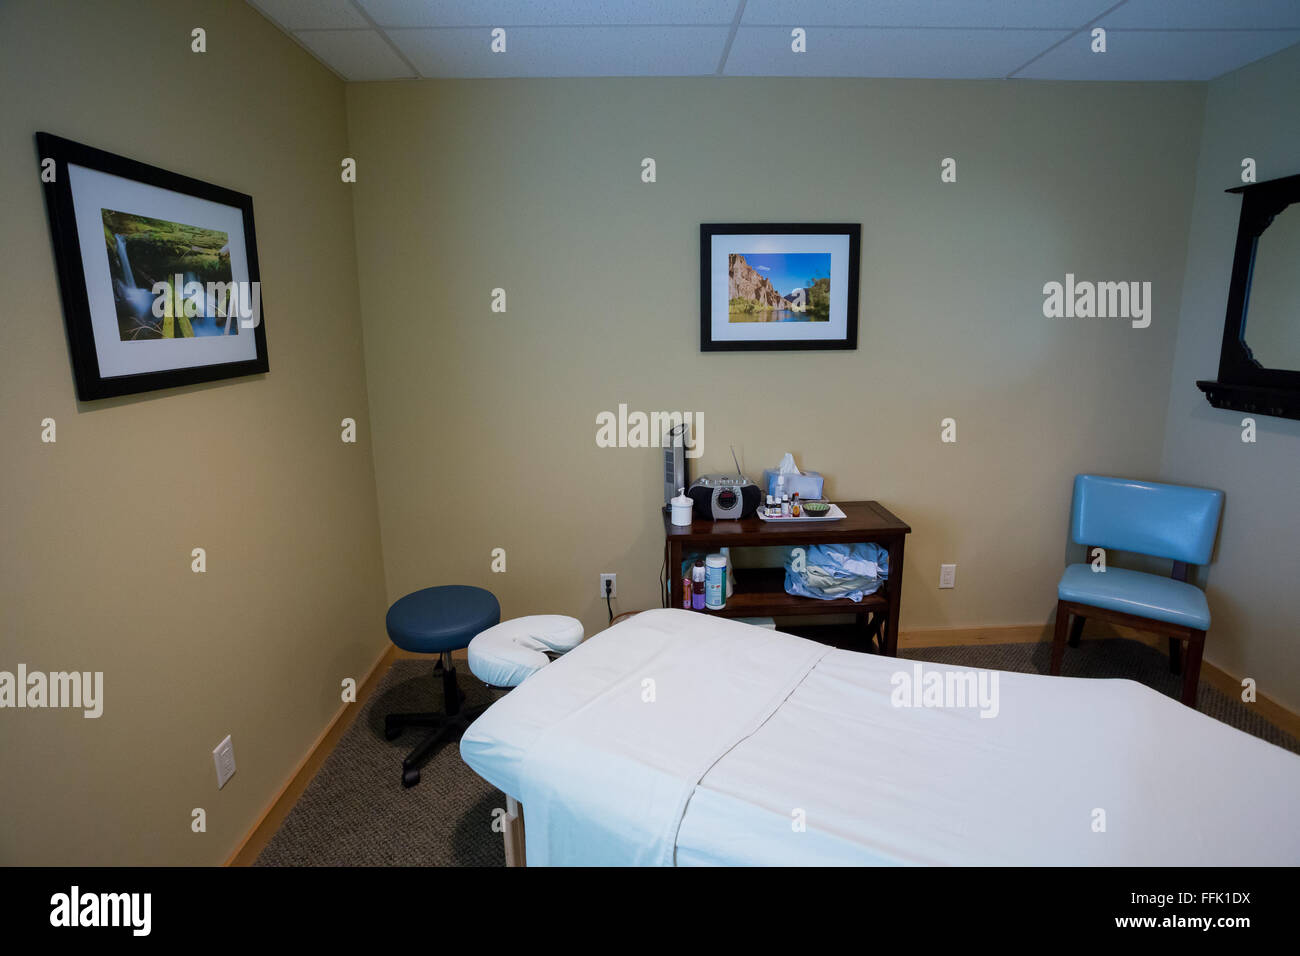 SPRINGFIELD, OR - AUGUST 20, 2014: Massage room with specialized table bed at a doctor's office in Oregon. Stock Photo